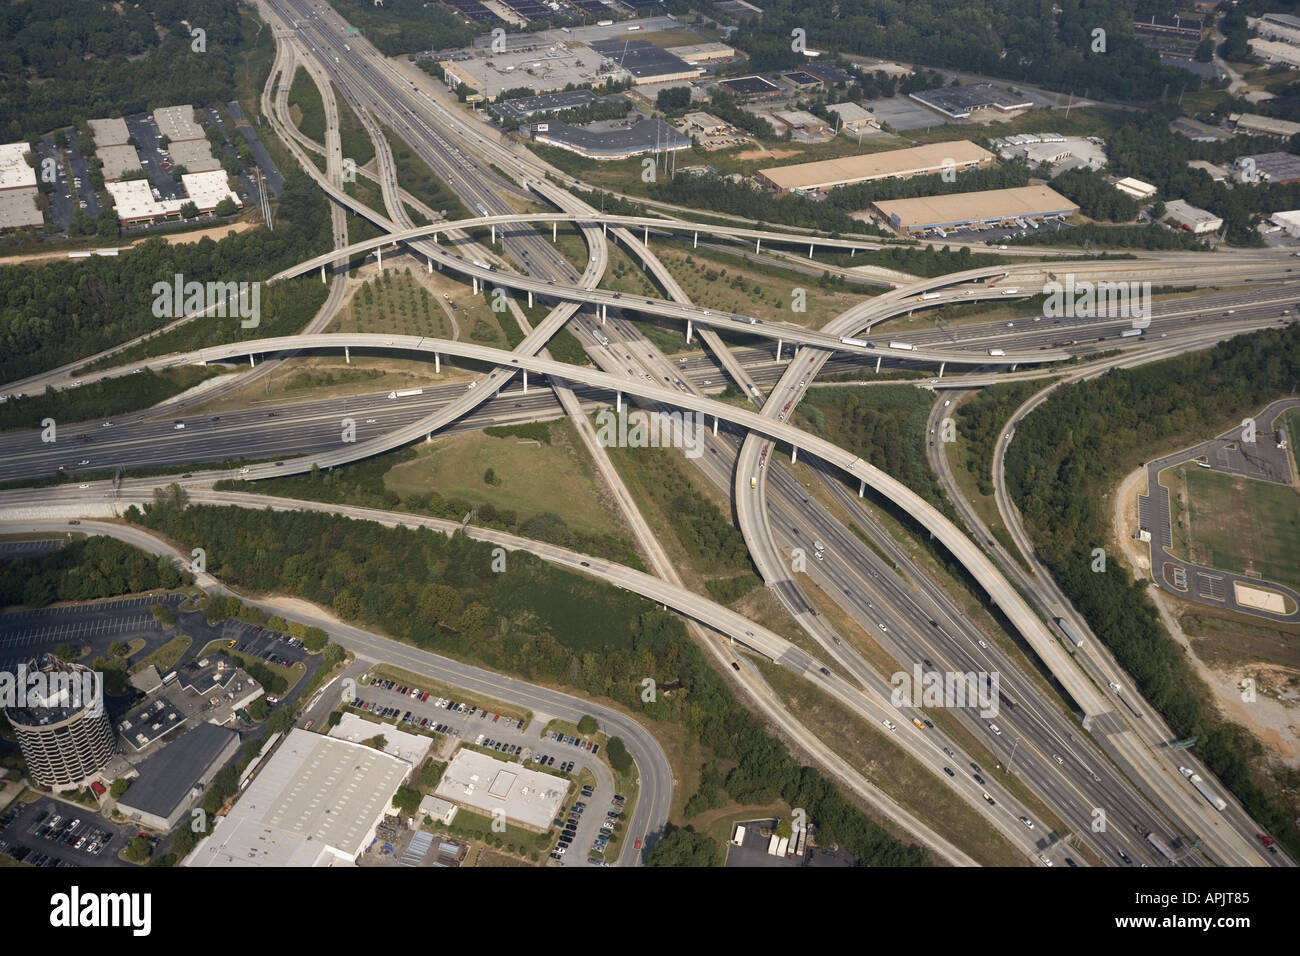 Aerial view of Interstate Cloverleaf Highway Intersection in